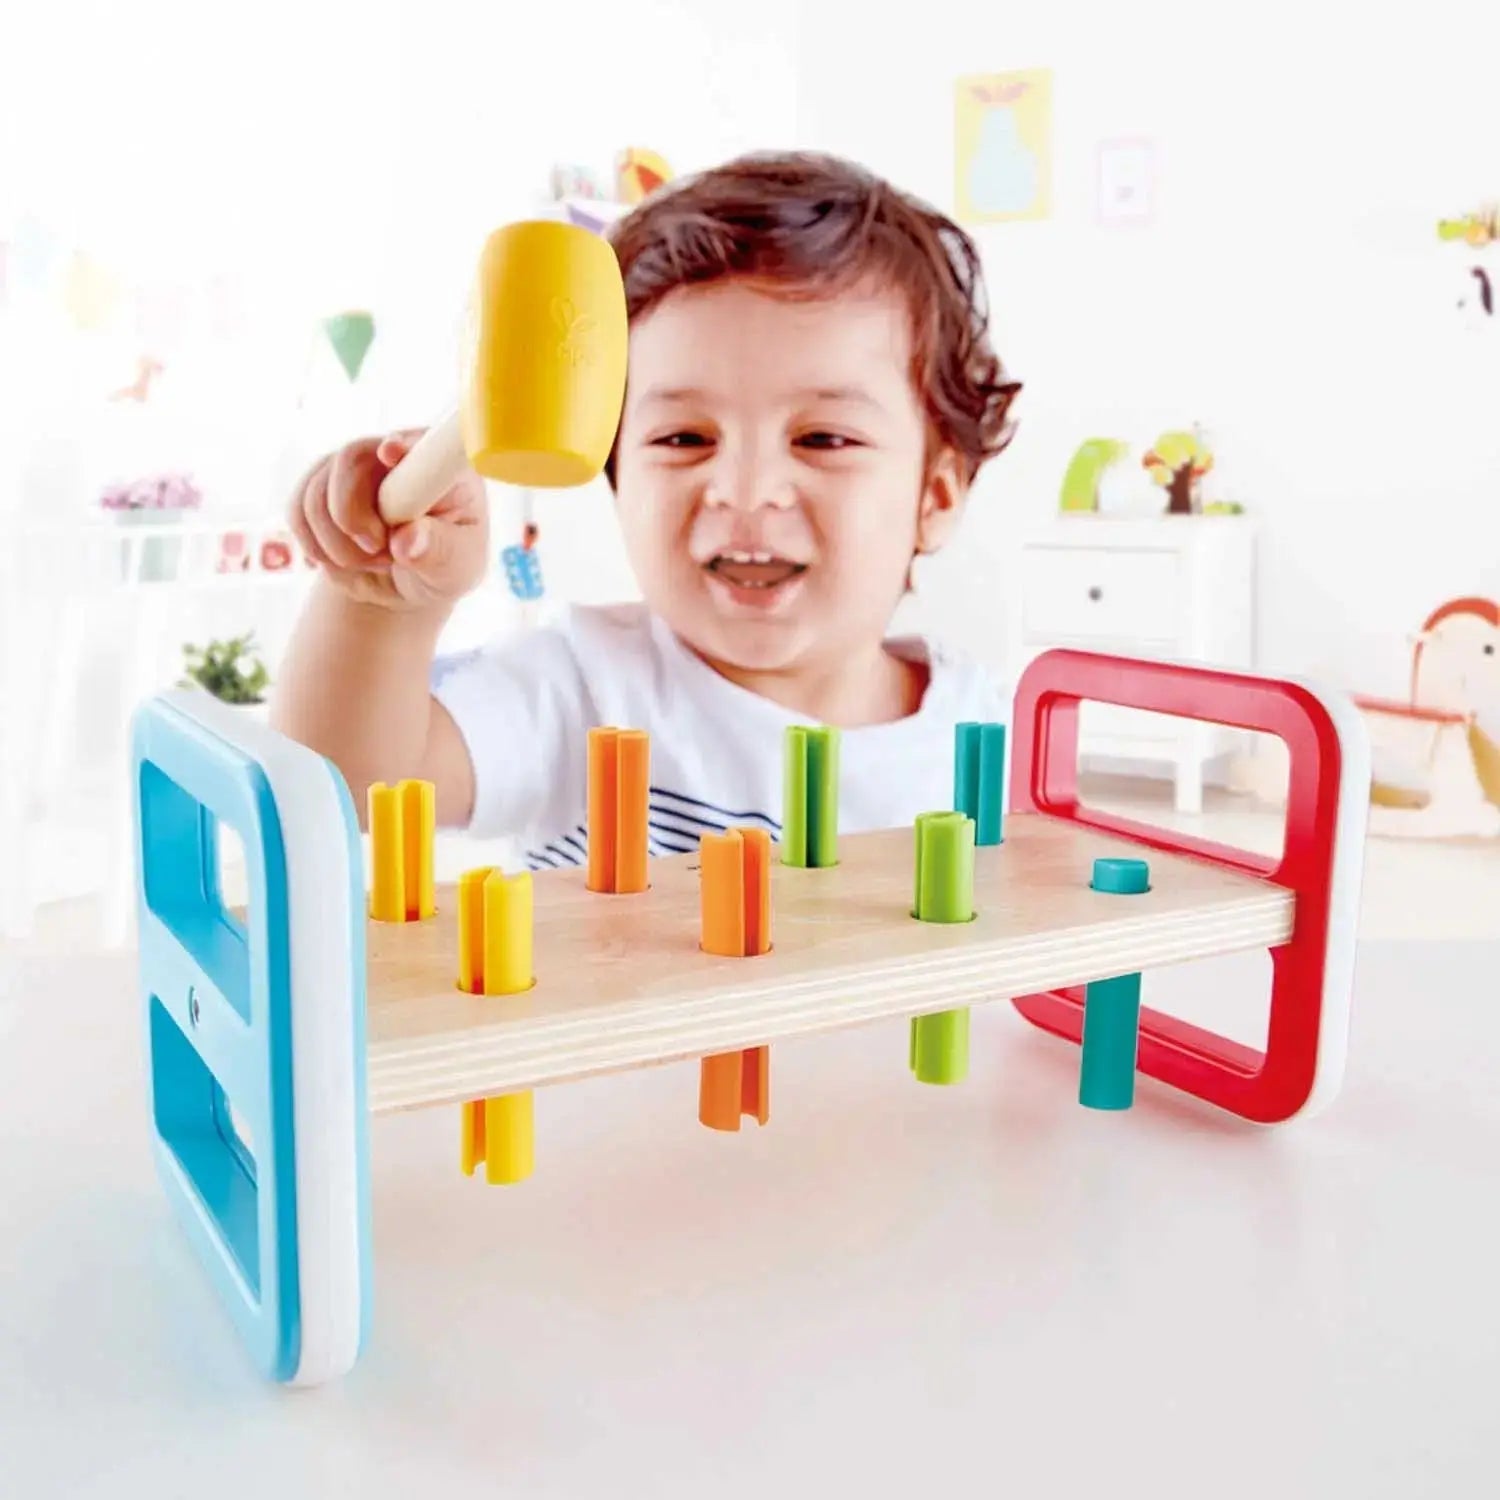 Who is Hape Toys?